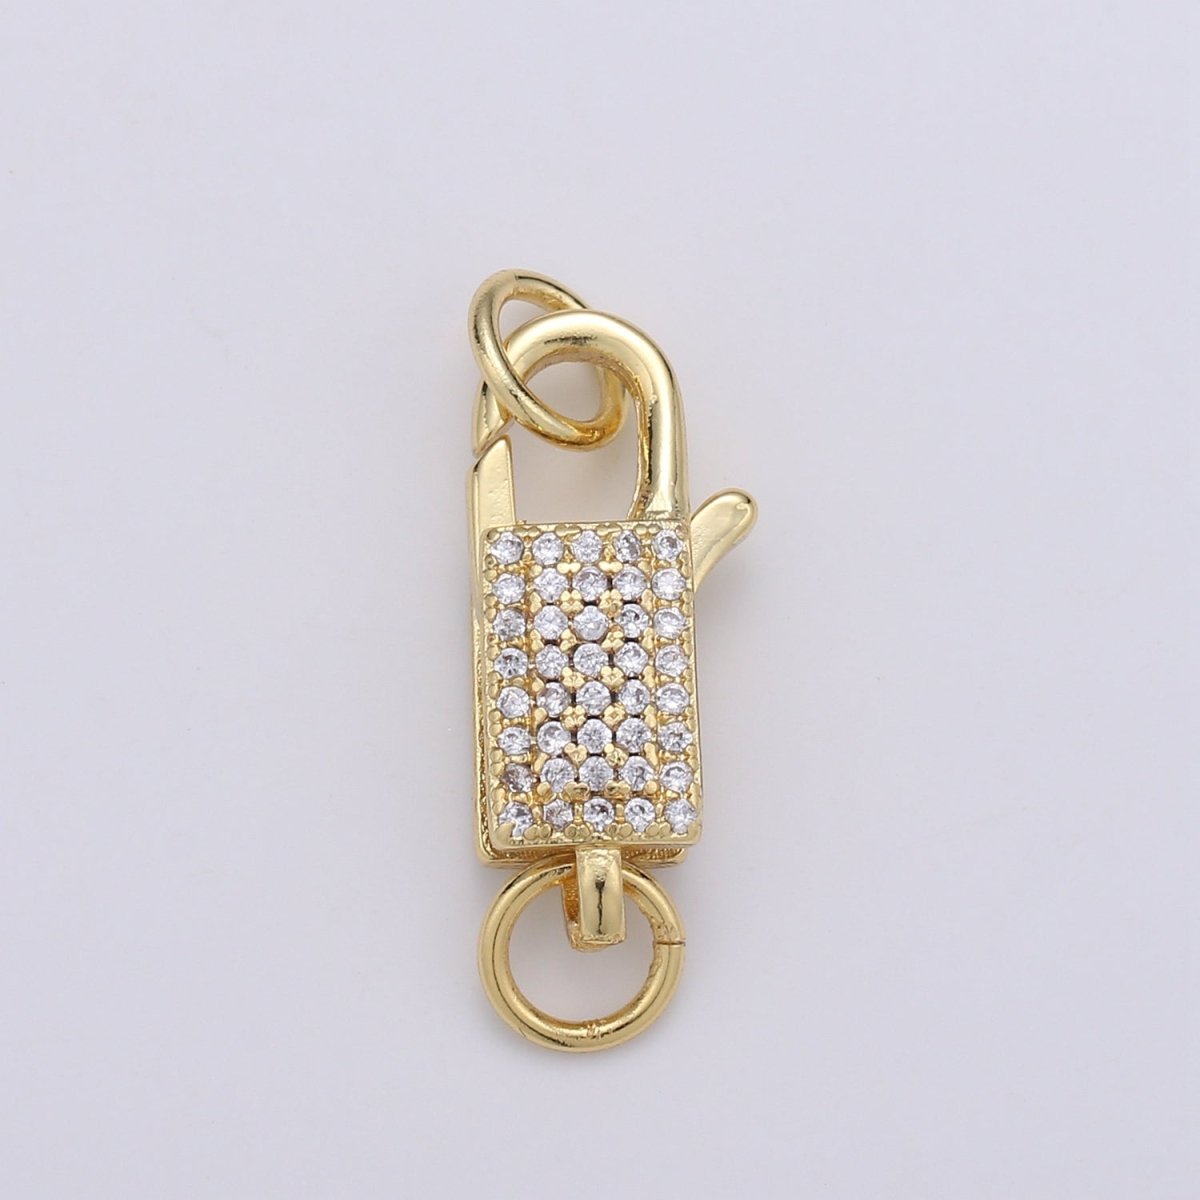 Lobster Clasp with Rings Rectangular Jewelry End Clasp Charms Supplies For DIY Jewelry Making K-730 - DLUXCA